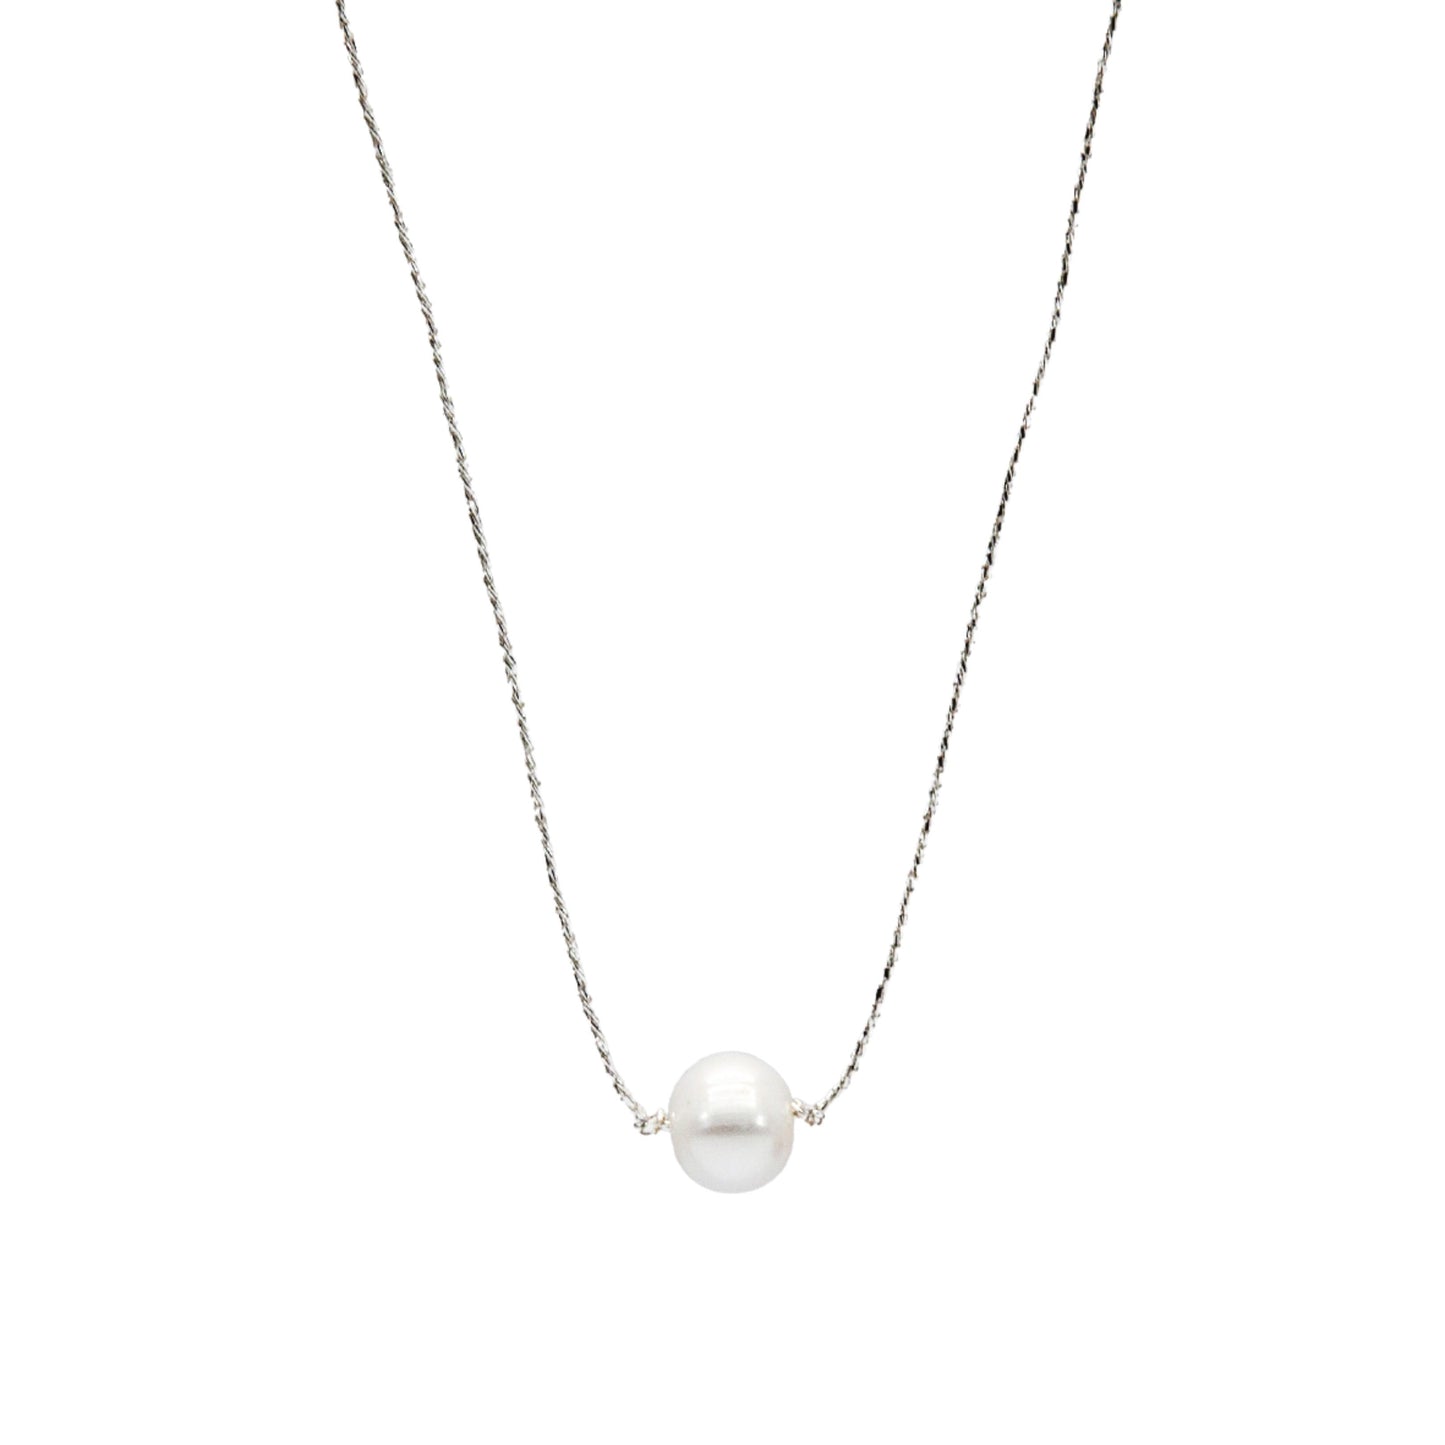 Freshwater Pearl on Silk Thread Necklace - Silver Tone